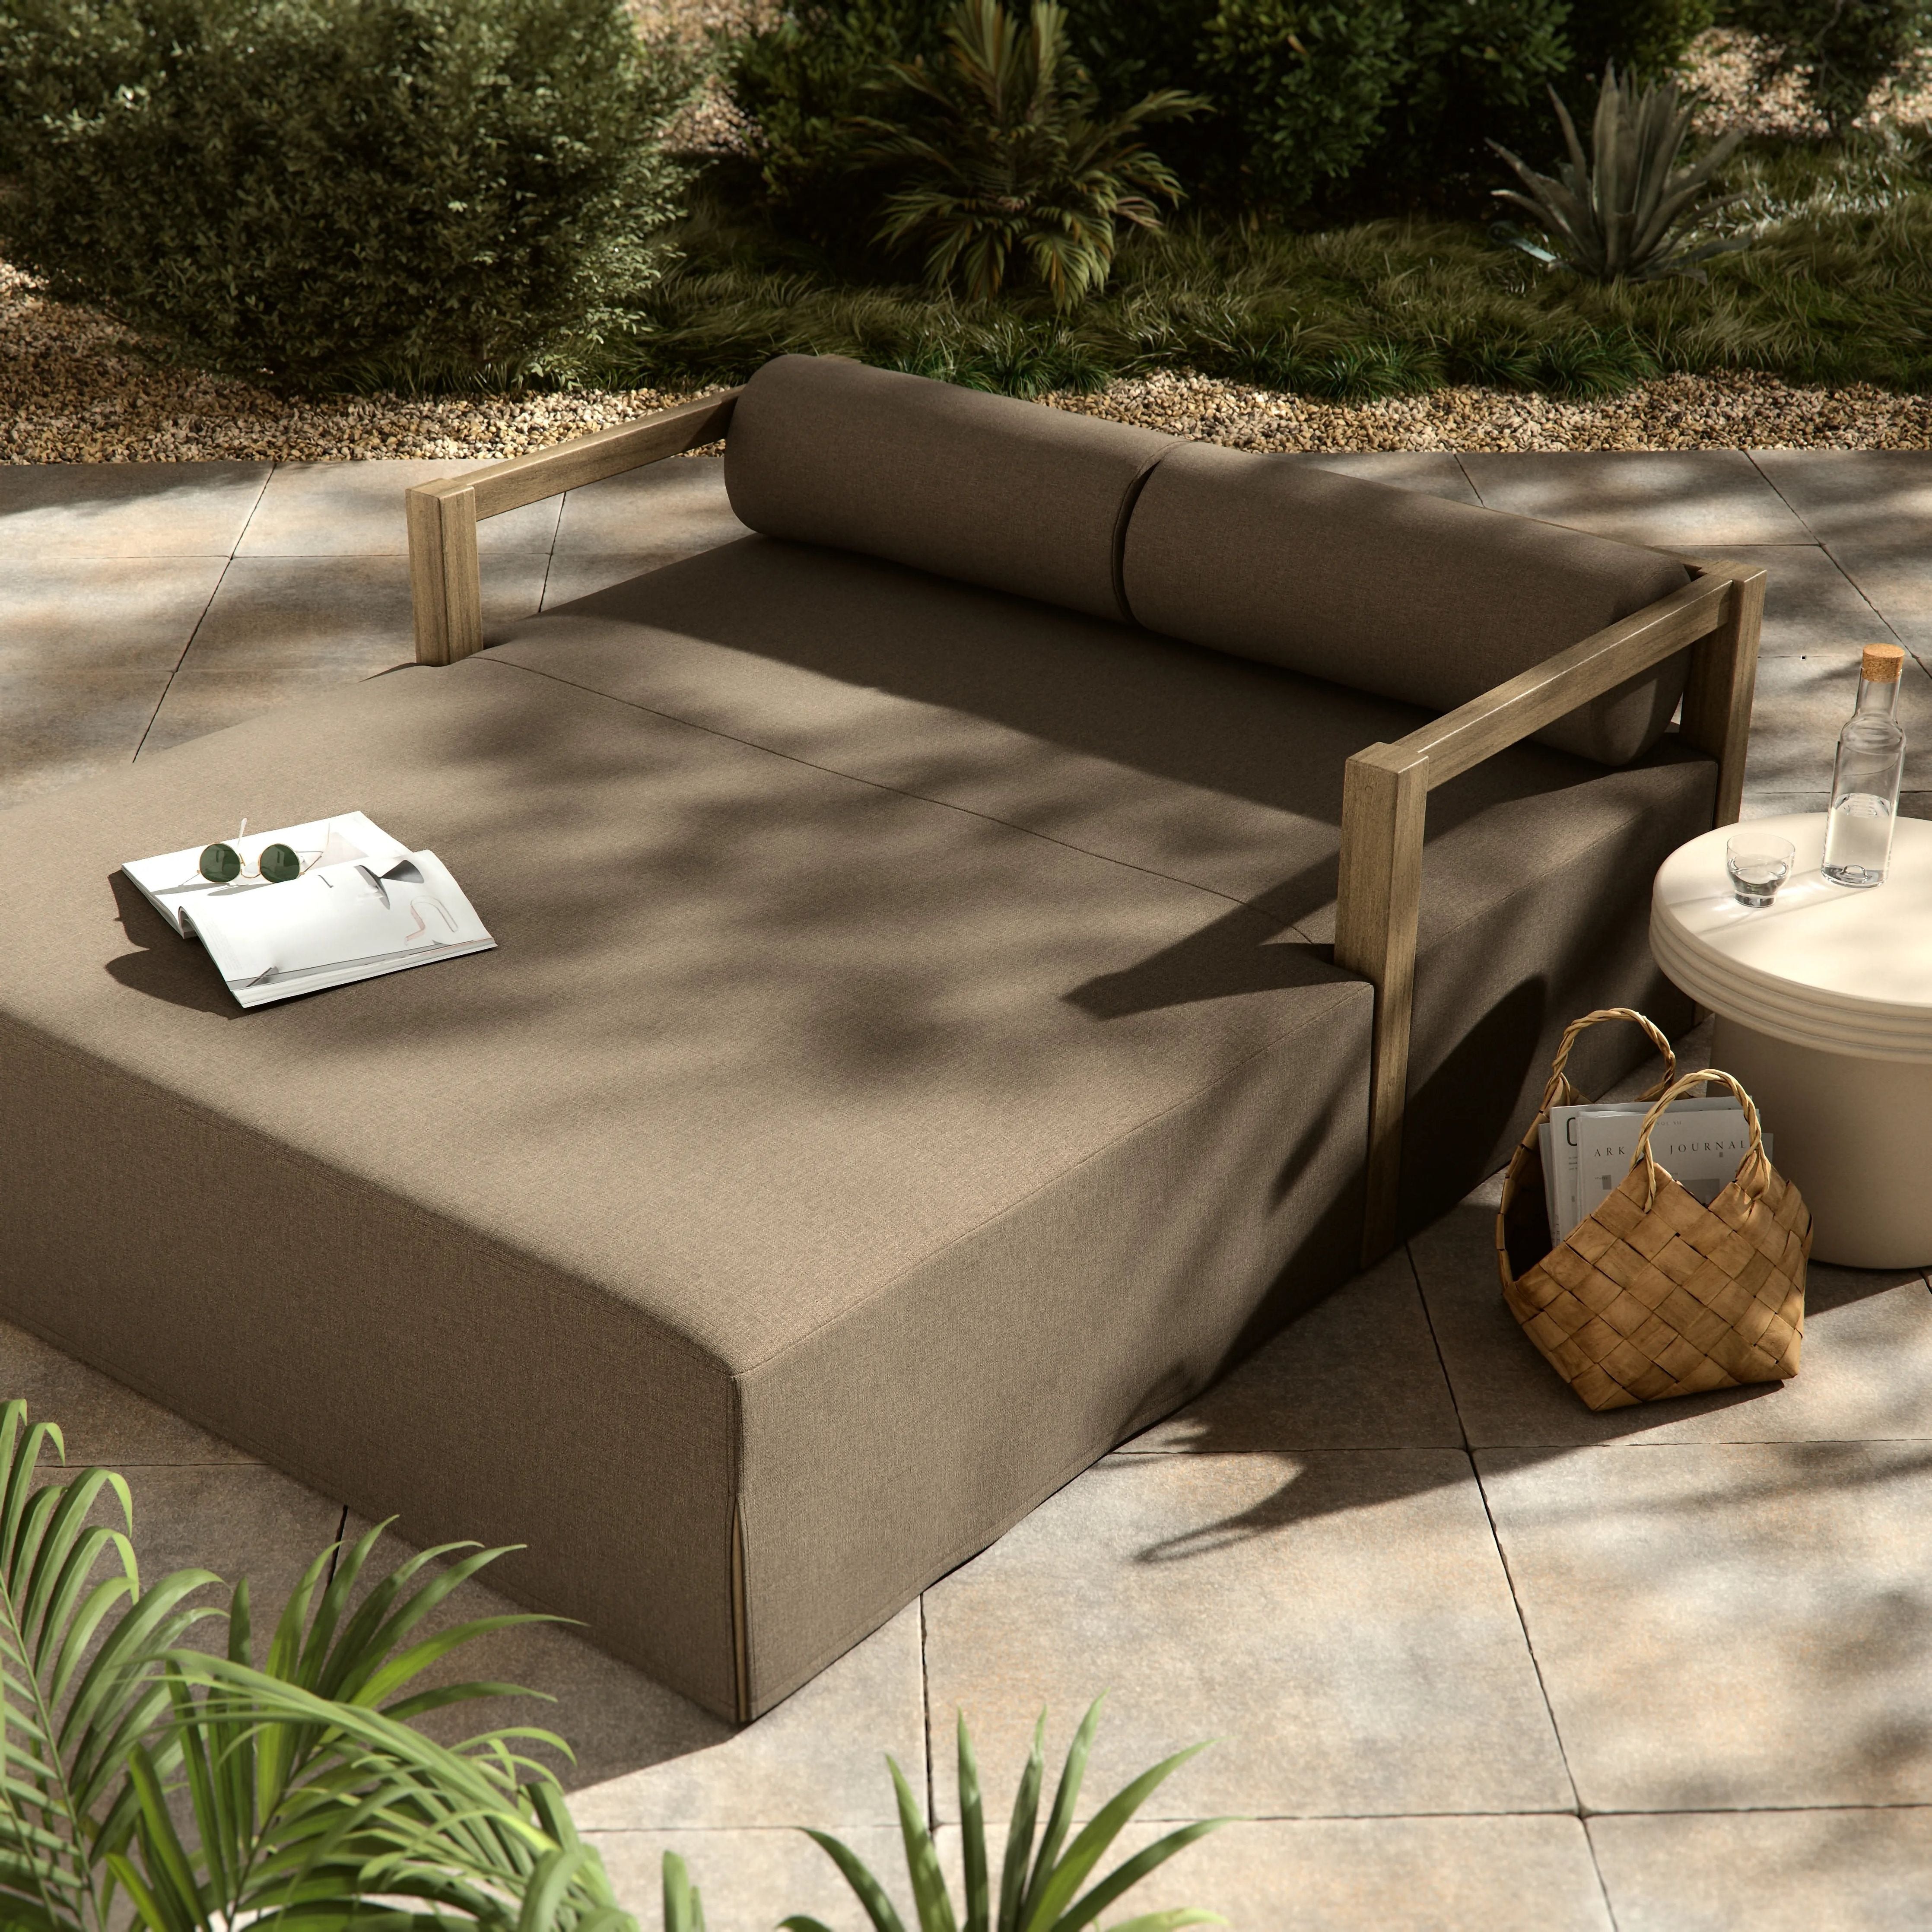 A soft, durable slipcover brings a complementary casual and laid-back look to structured framing of FSCÂ®-certified teak. A bolster back cushion offers support and comfort in this outdoor daybed. Made in Italy, this sustainably made fabric is antimicrobial and highly resistant to sunlight, abrasion and chlorine. Amethyst Home provides interior design, new home construction design consulting, vintage area rugs, and lighting in the Dallas metro area.